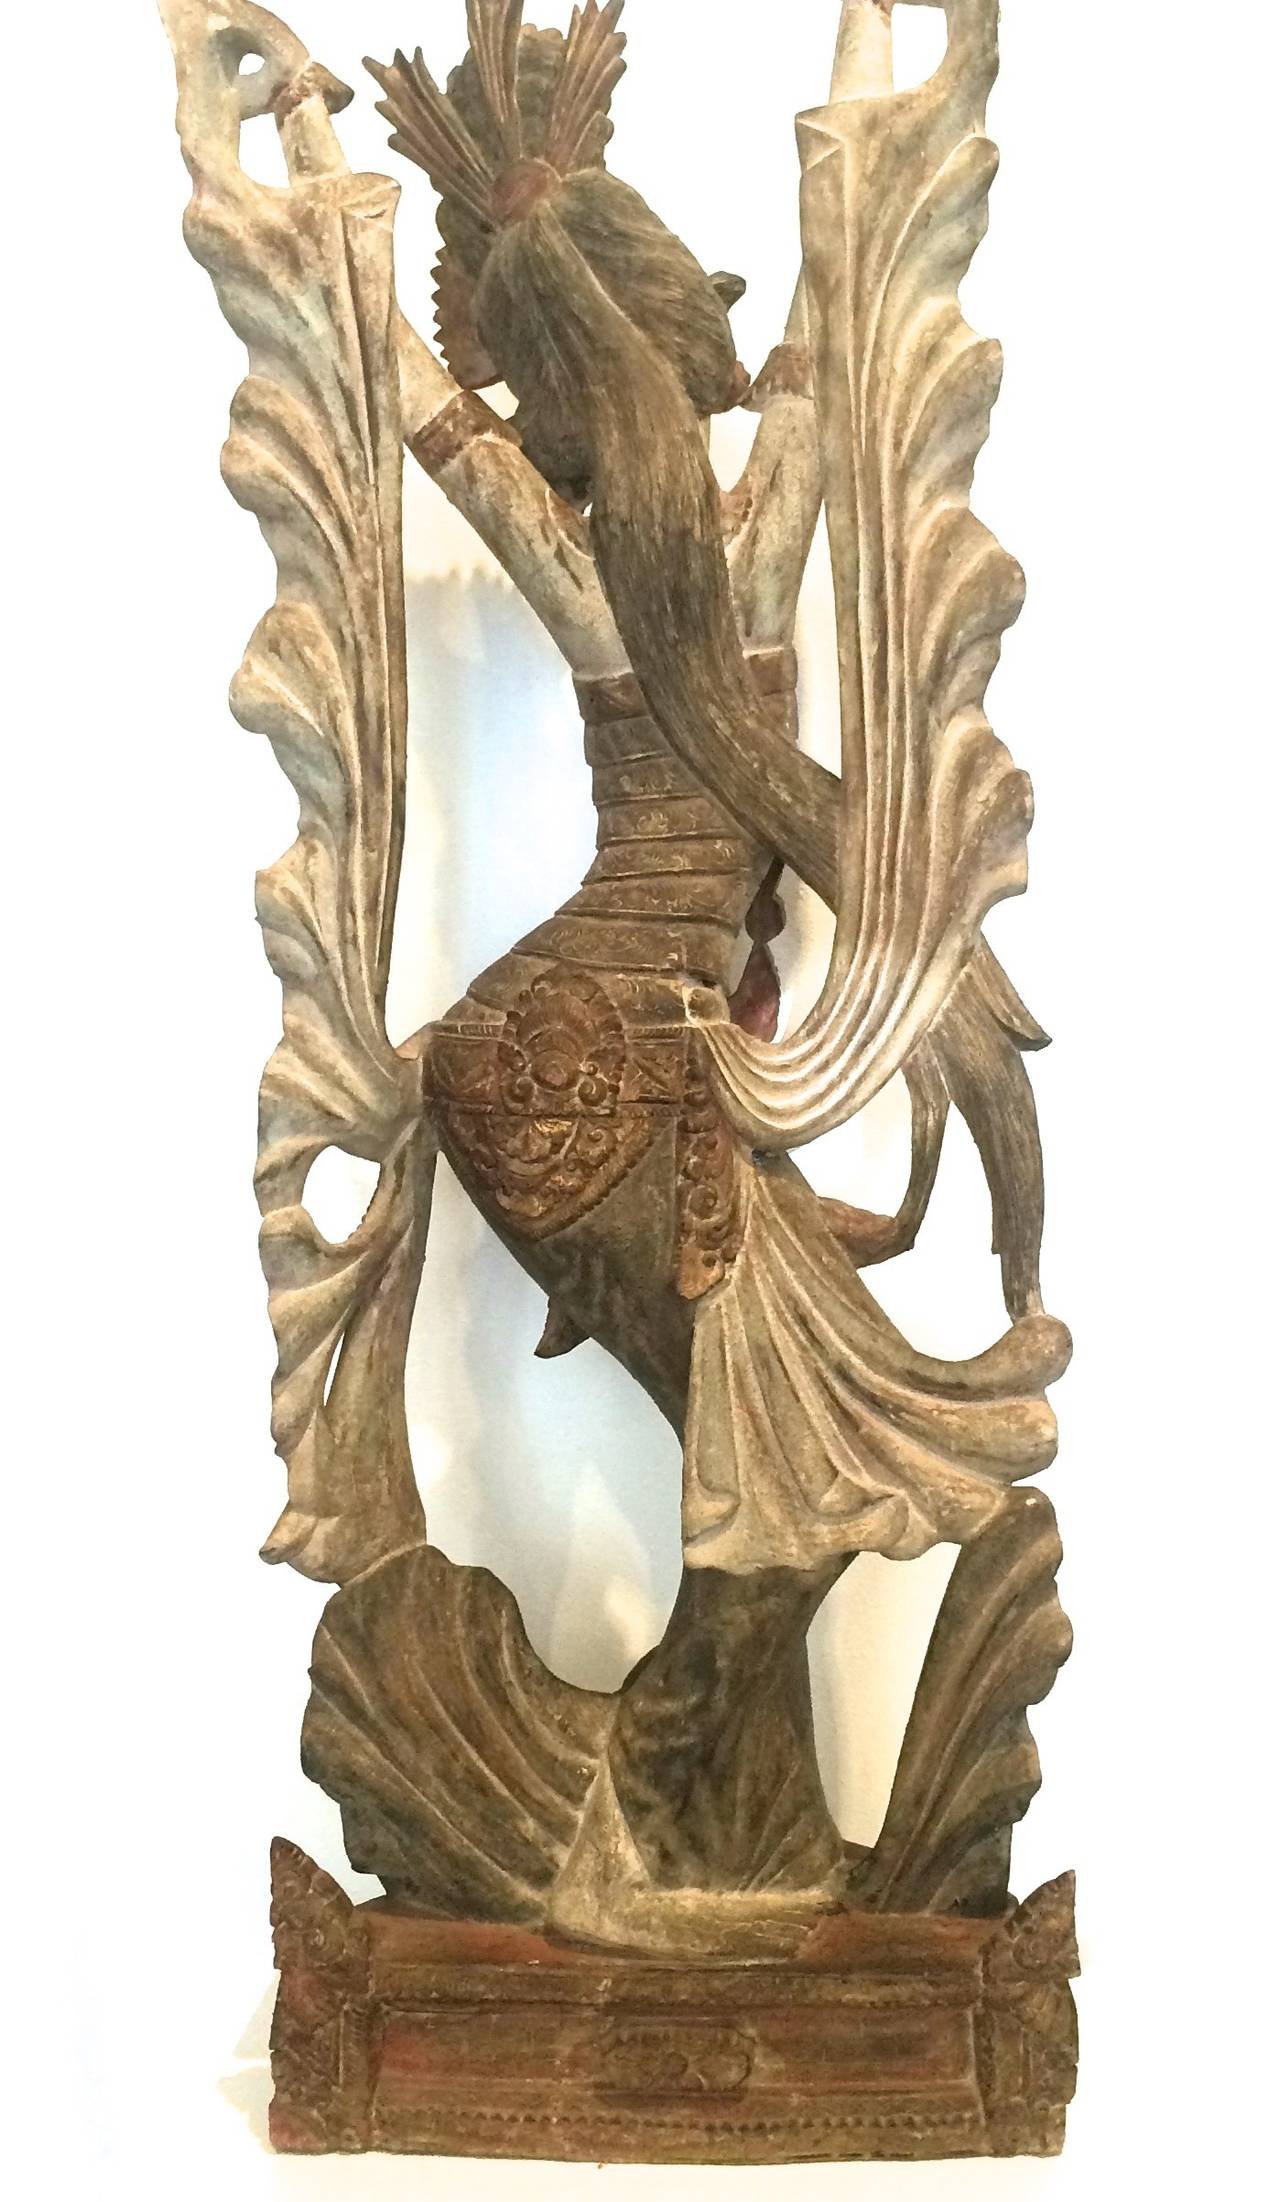 Balinese Wood Figure of a Dancer - Other Art Style Sculpture by Unknown